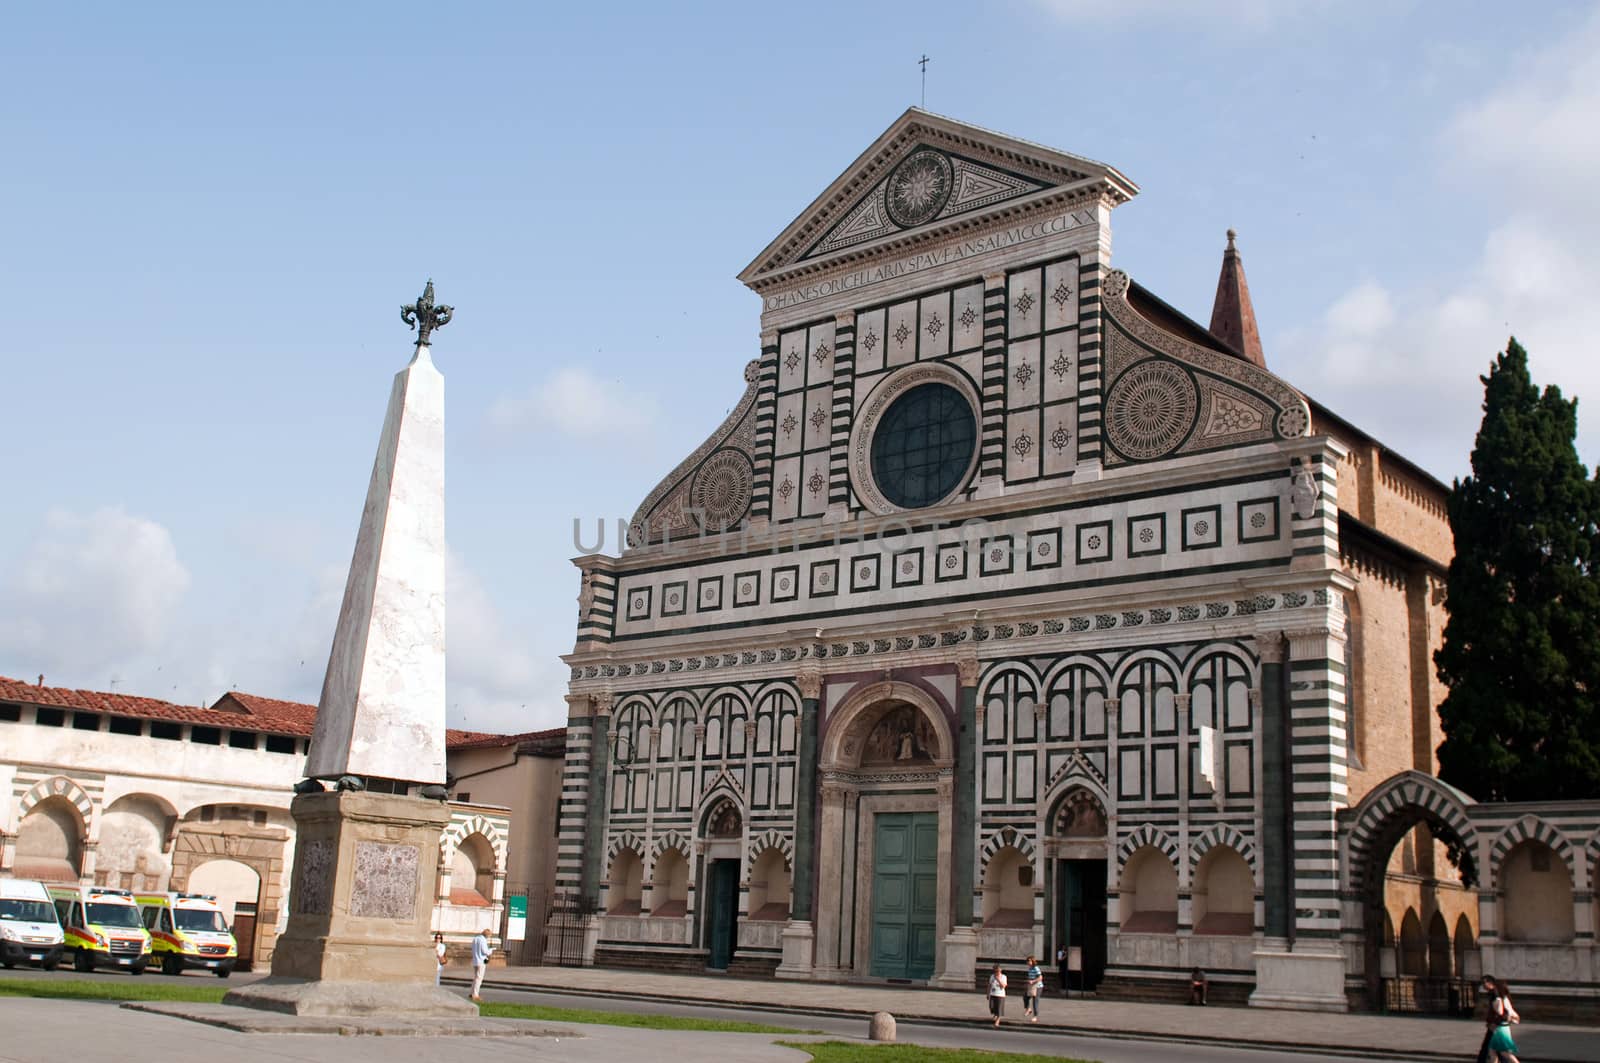 The facade of Santa Maria Novella, completed by Leon Battista Alberti in 1470 in Florence, Tuscany, Italy.